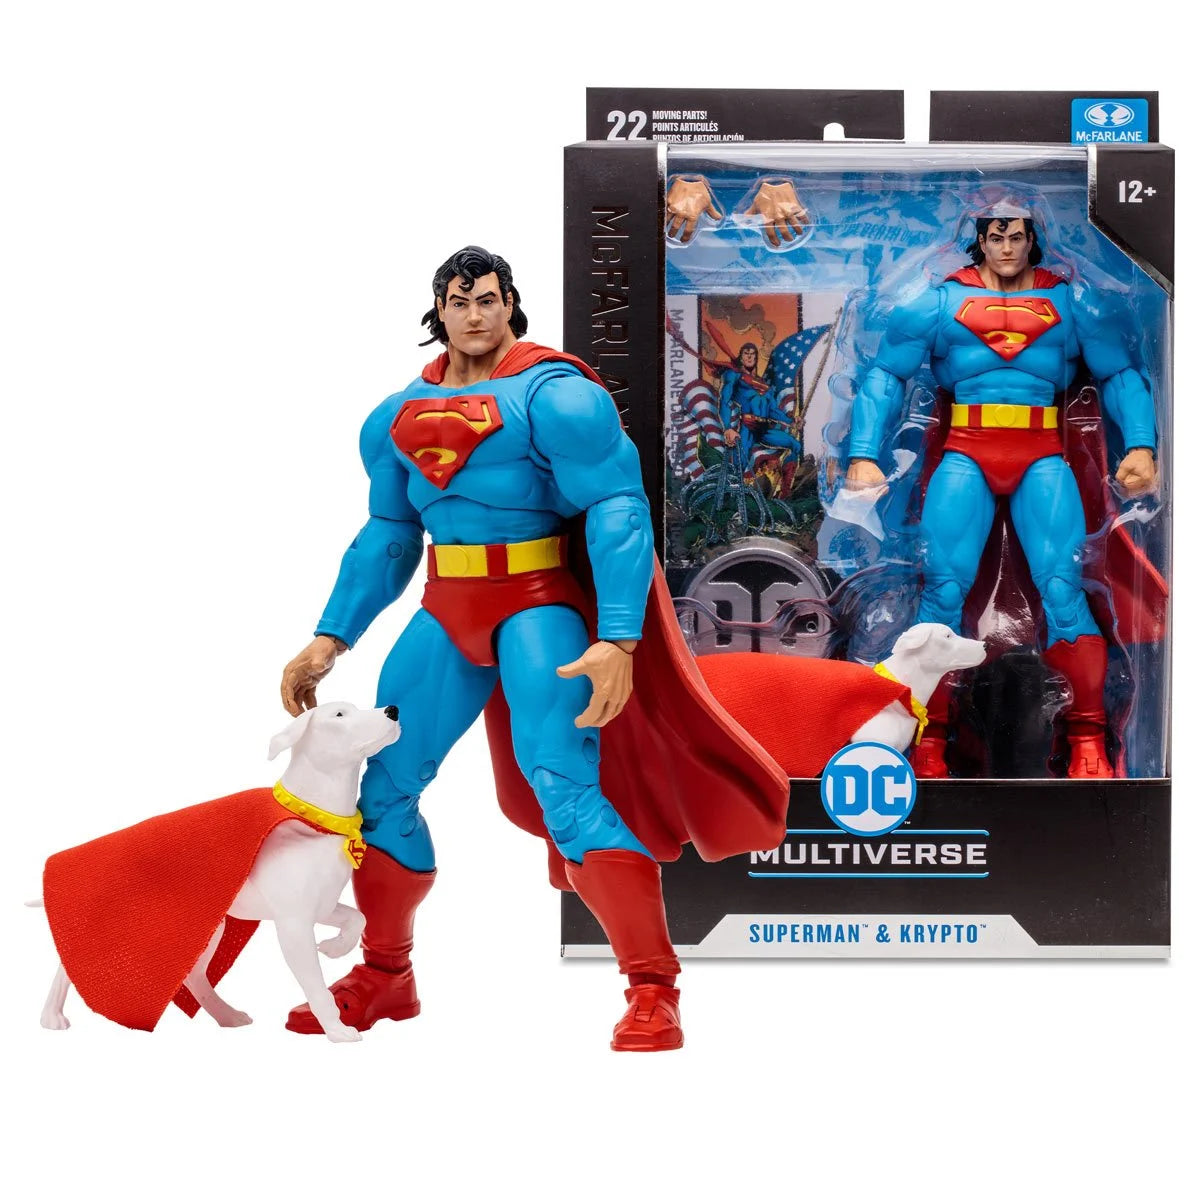 DC McFarlane Collector Edition Wave 3 Superman and Krypto Return of Superman 7-Inch Scale Action Figure